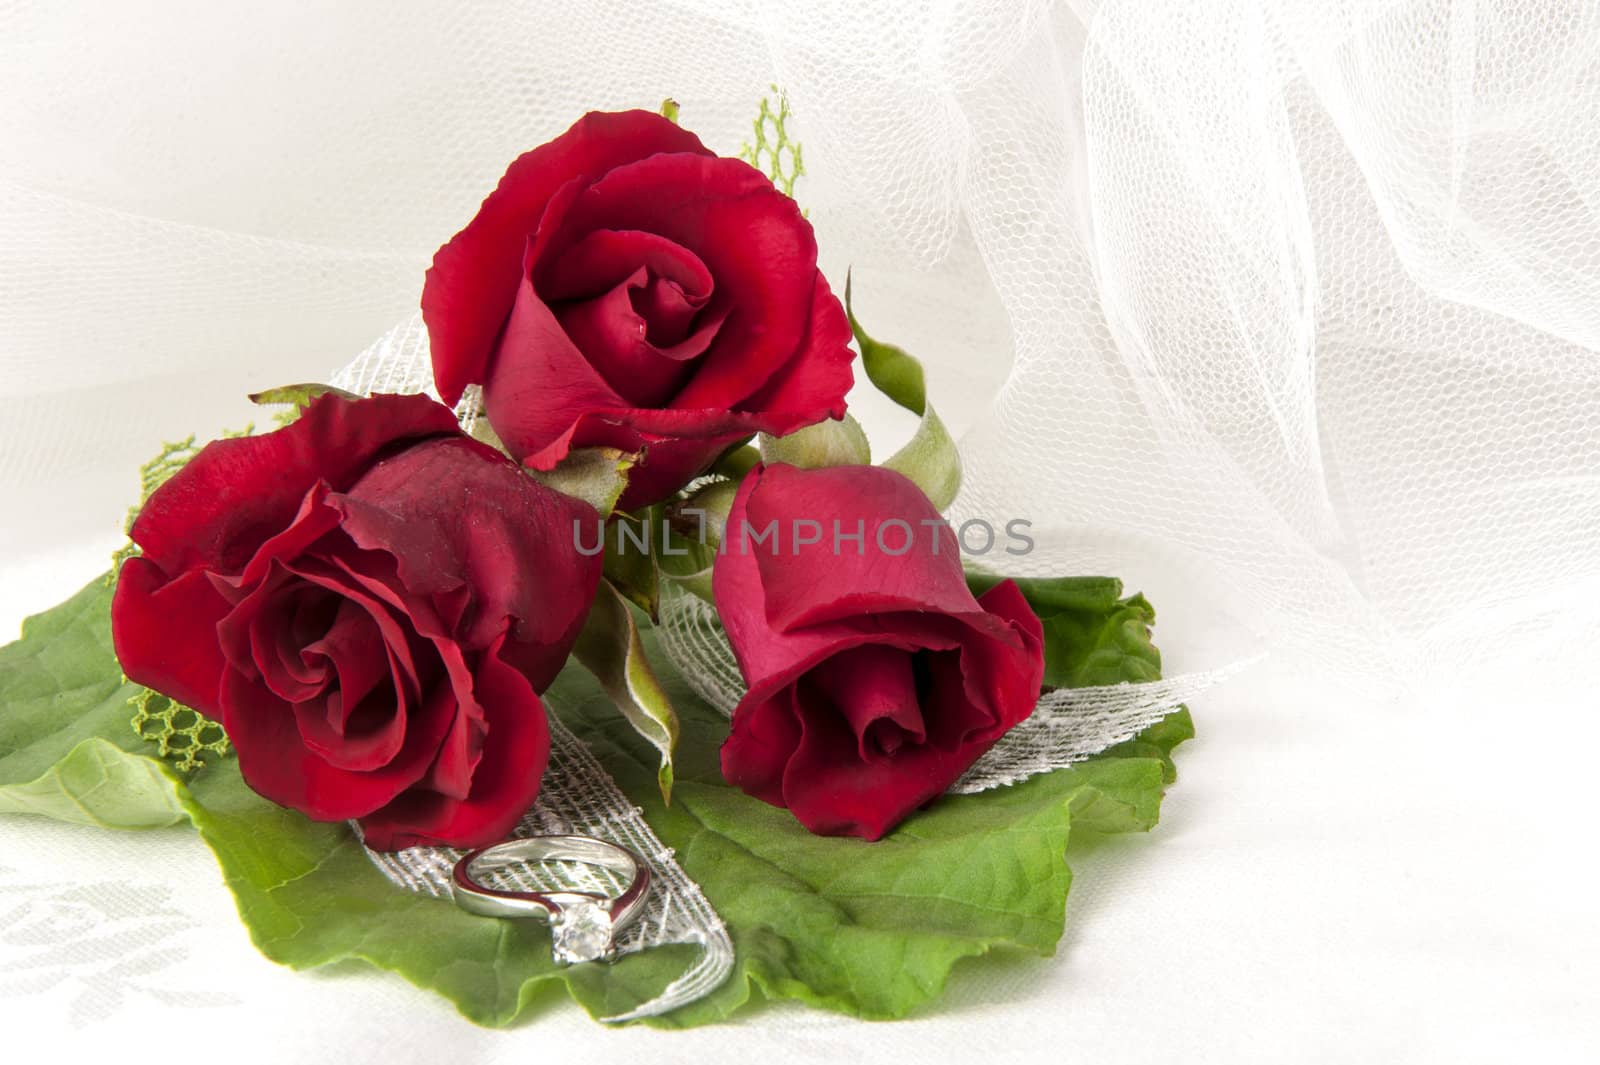 red roses and wedding rings by carla720